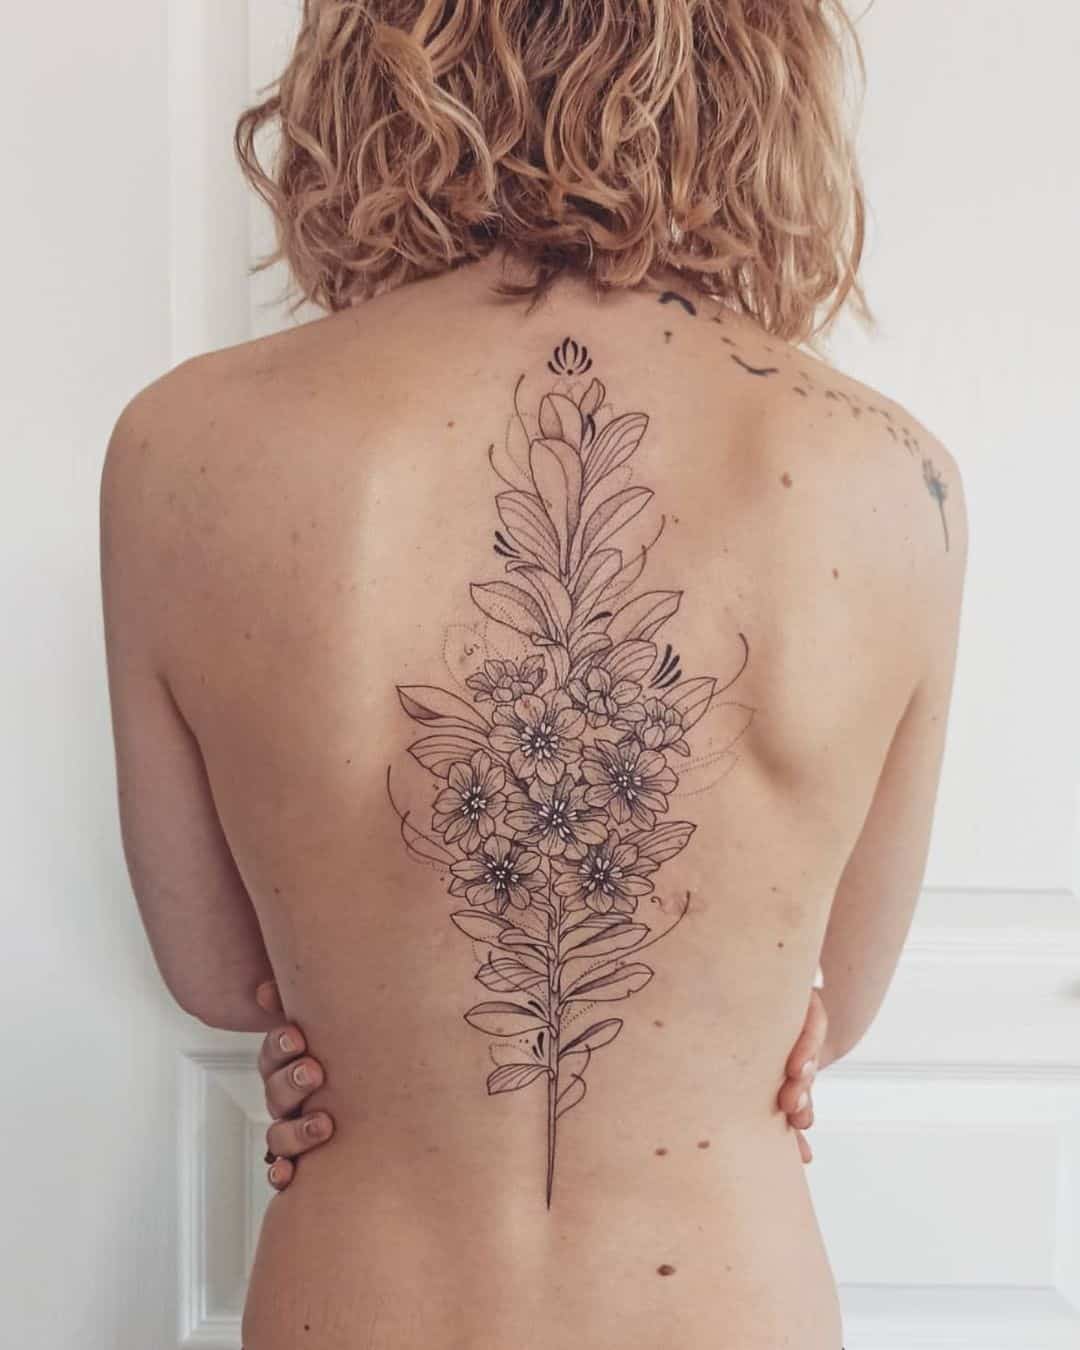 These Are the Most and Least Painful Places on Your Body to Tattoo